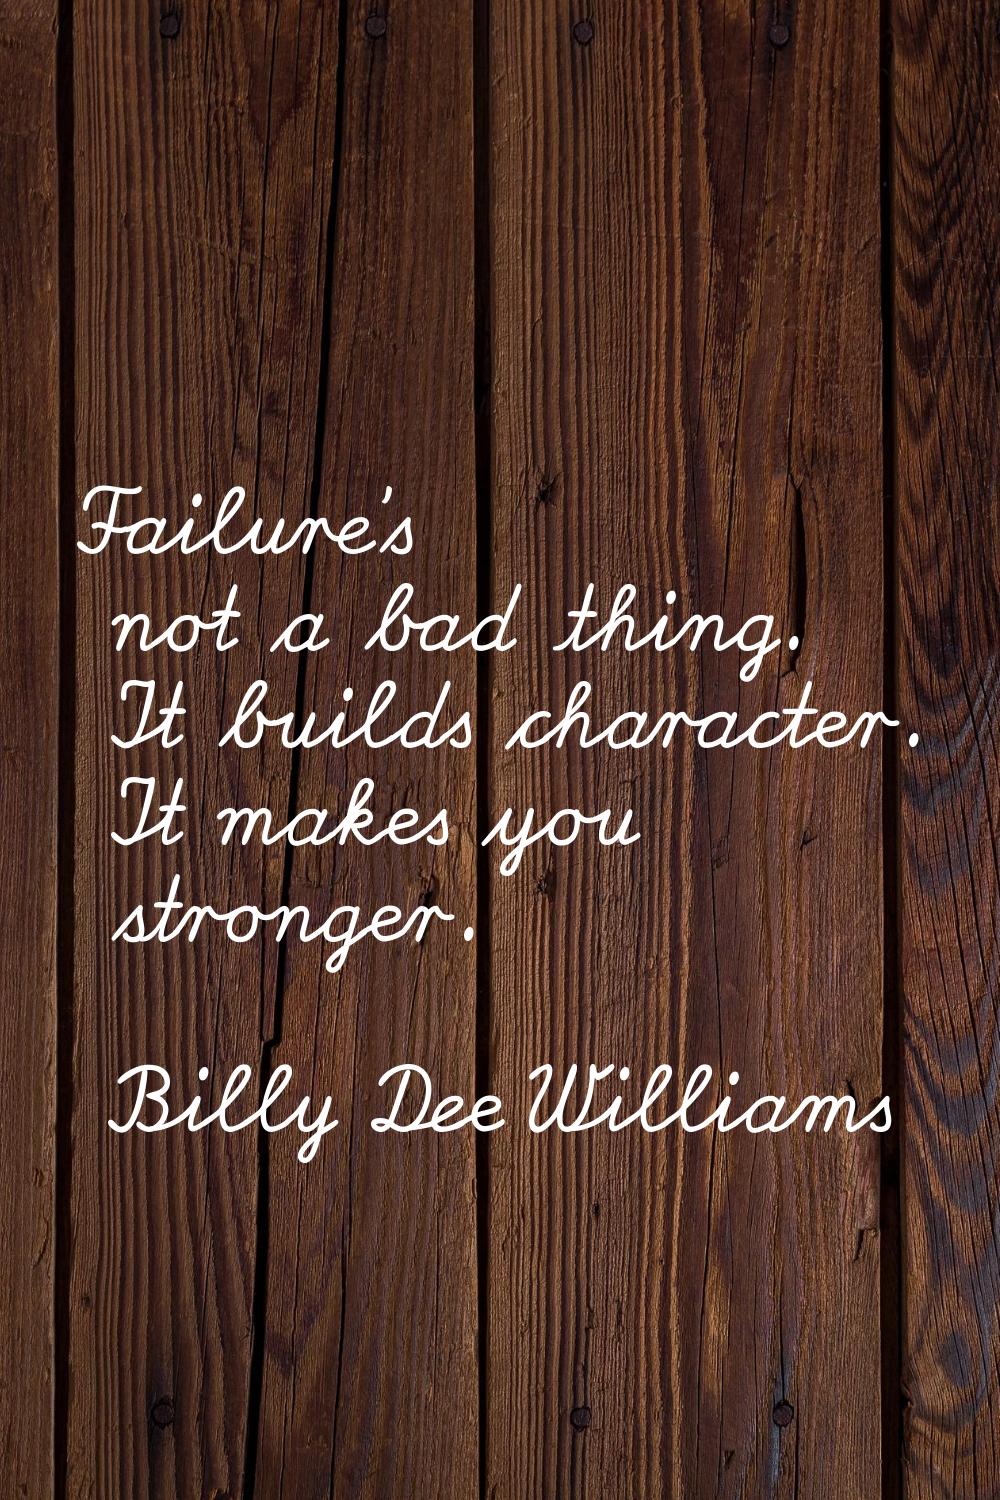 Failure's not a bad thing. It builds character. It makes you stronger.